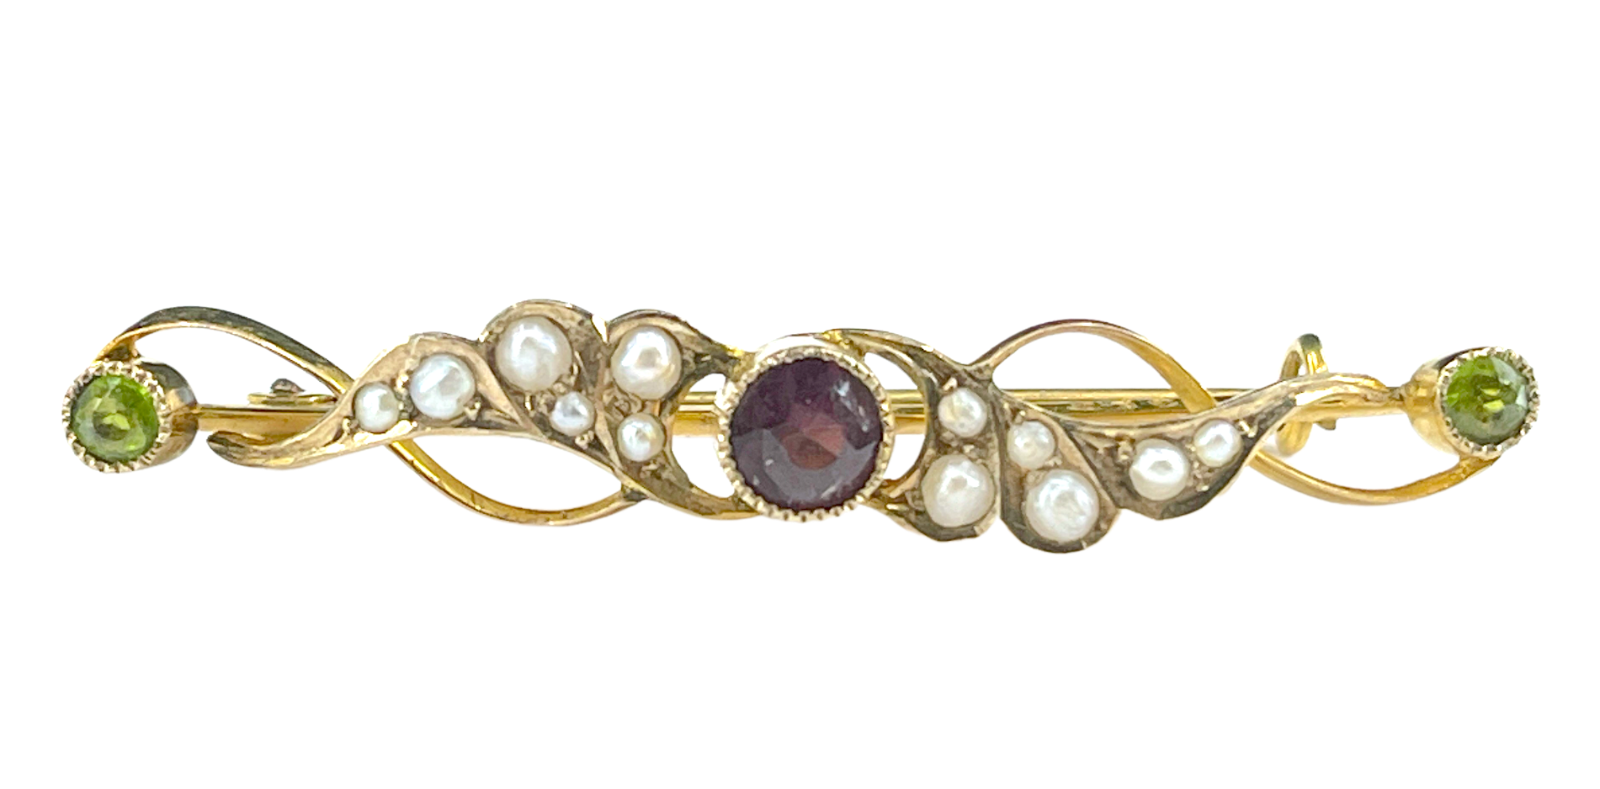 Art Nouveau Era antique Suffragette brooch set with amethyst, seed pearl and peridot